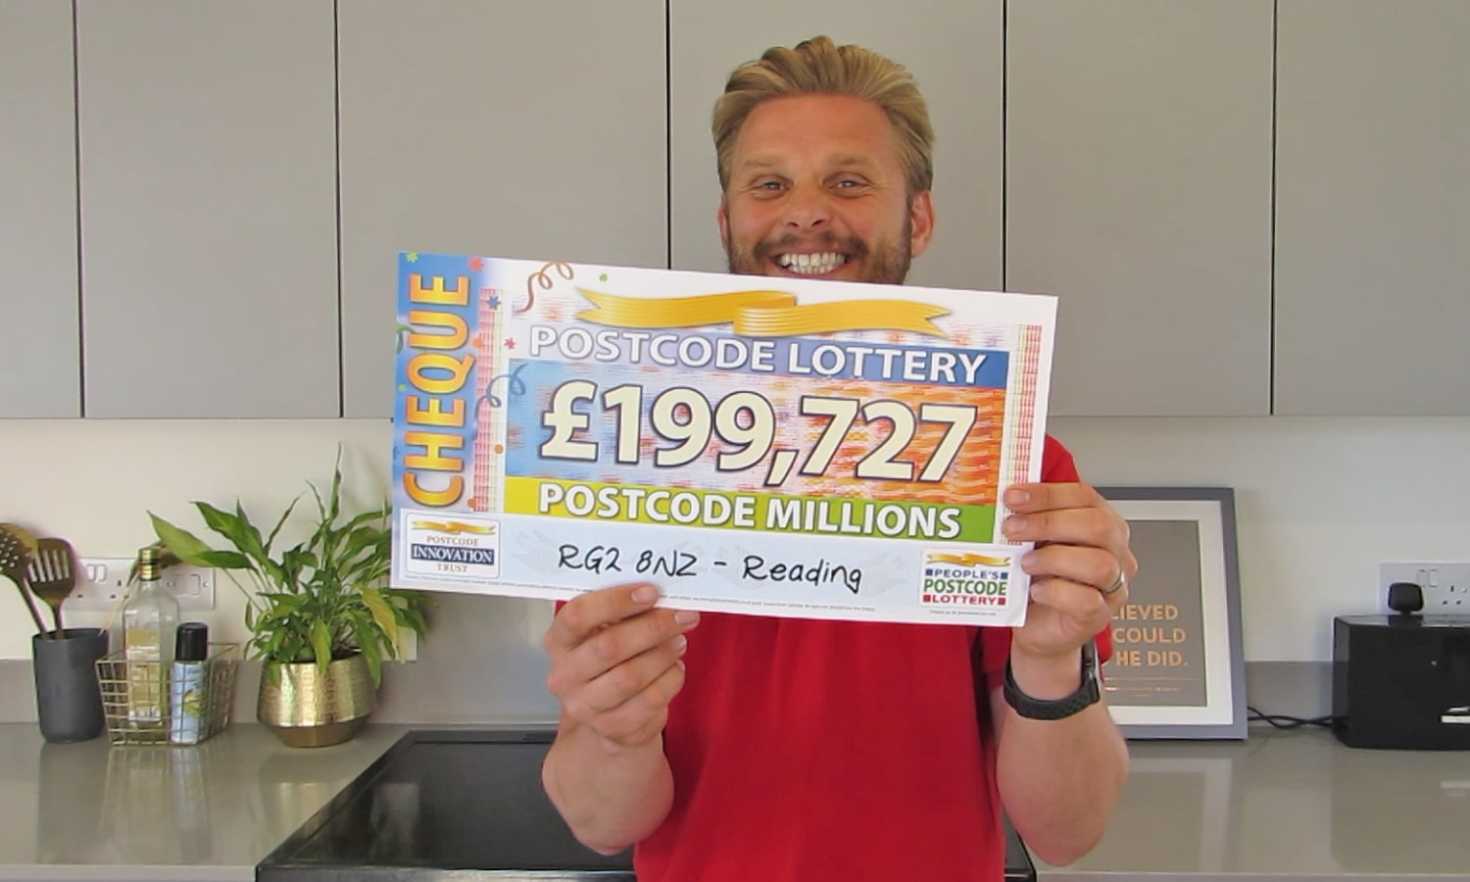 This month's Postcode Millions prize has landed in a lucky Reading postcode sector